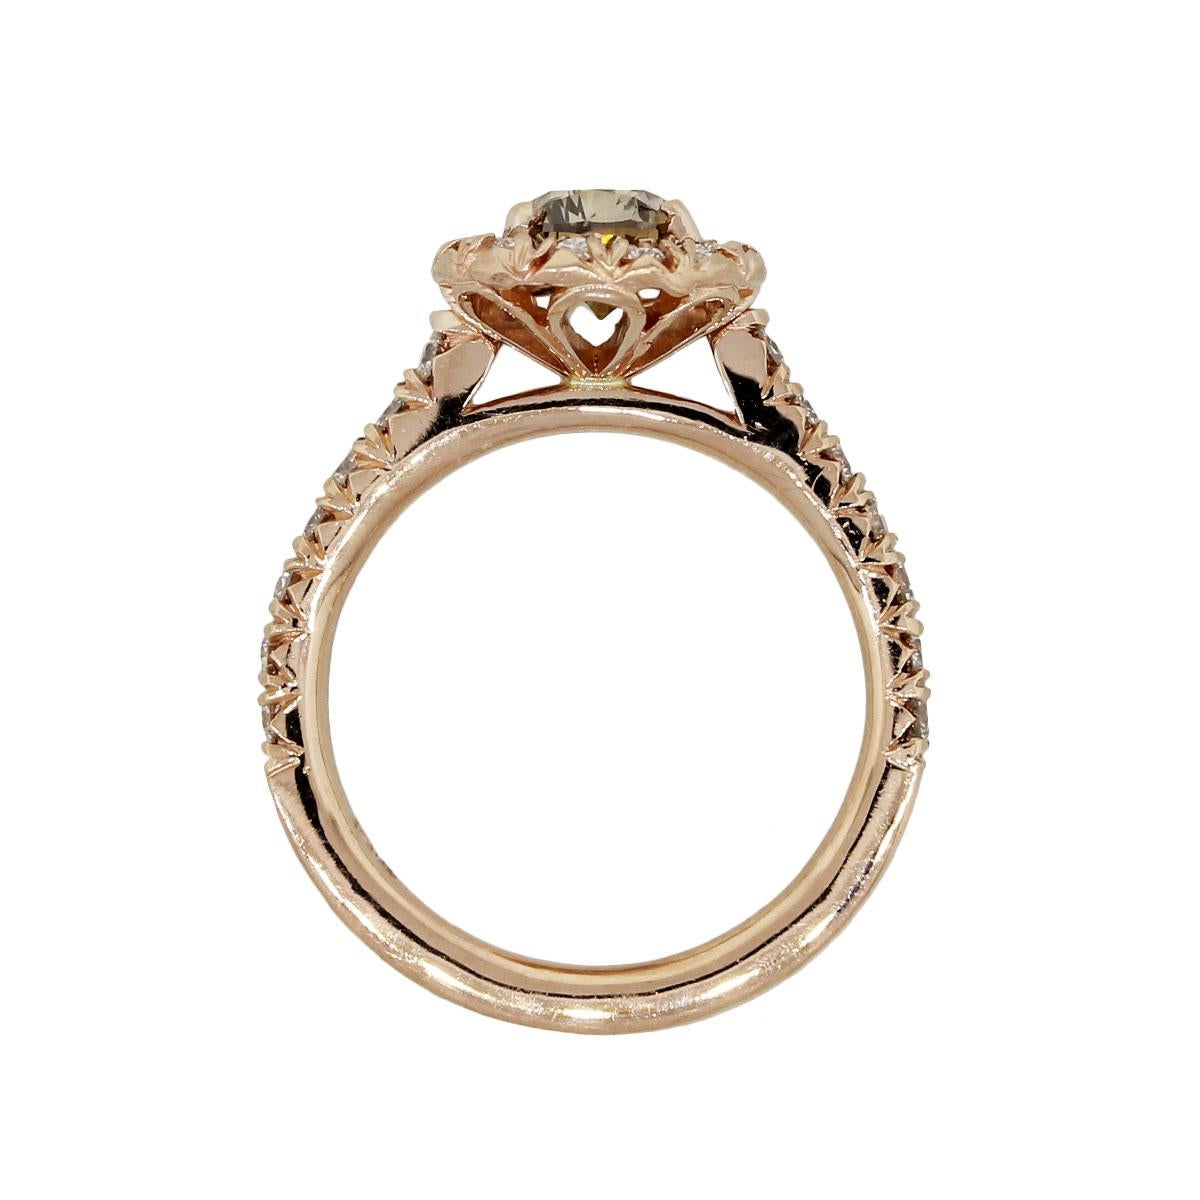 Material: 14k rose gold
Center Diamond Details: Fancy brown diamond approximately 1.22ct. Diamond is brown in color and SI2 in clarity
Additional Diamond Details: Approximately 0.75ctw of round brilliant diamonds.
Ring Size: 6.25 (Can be